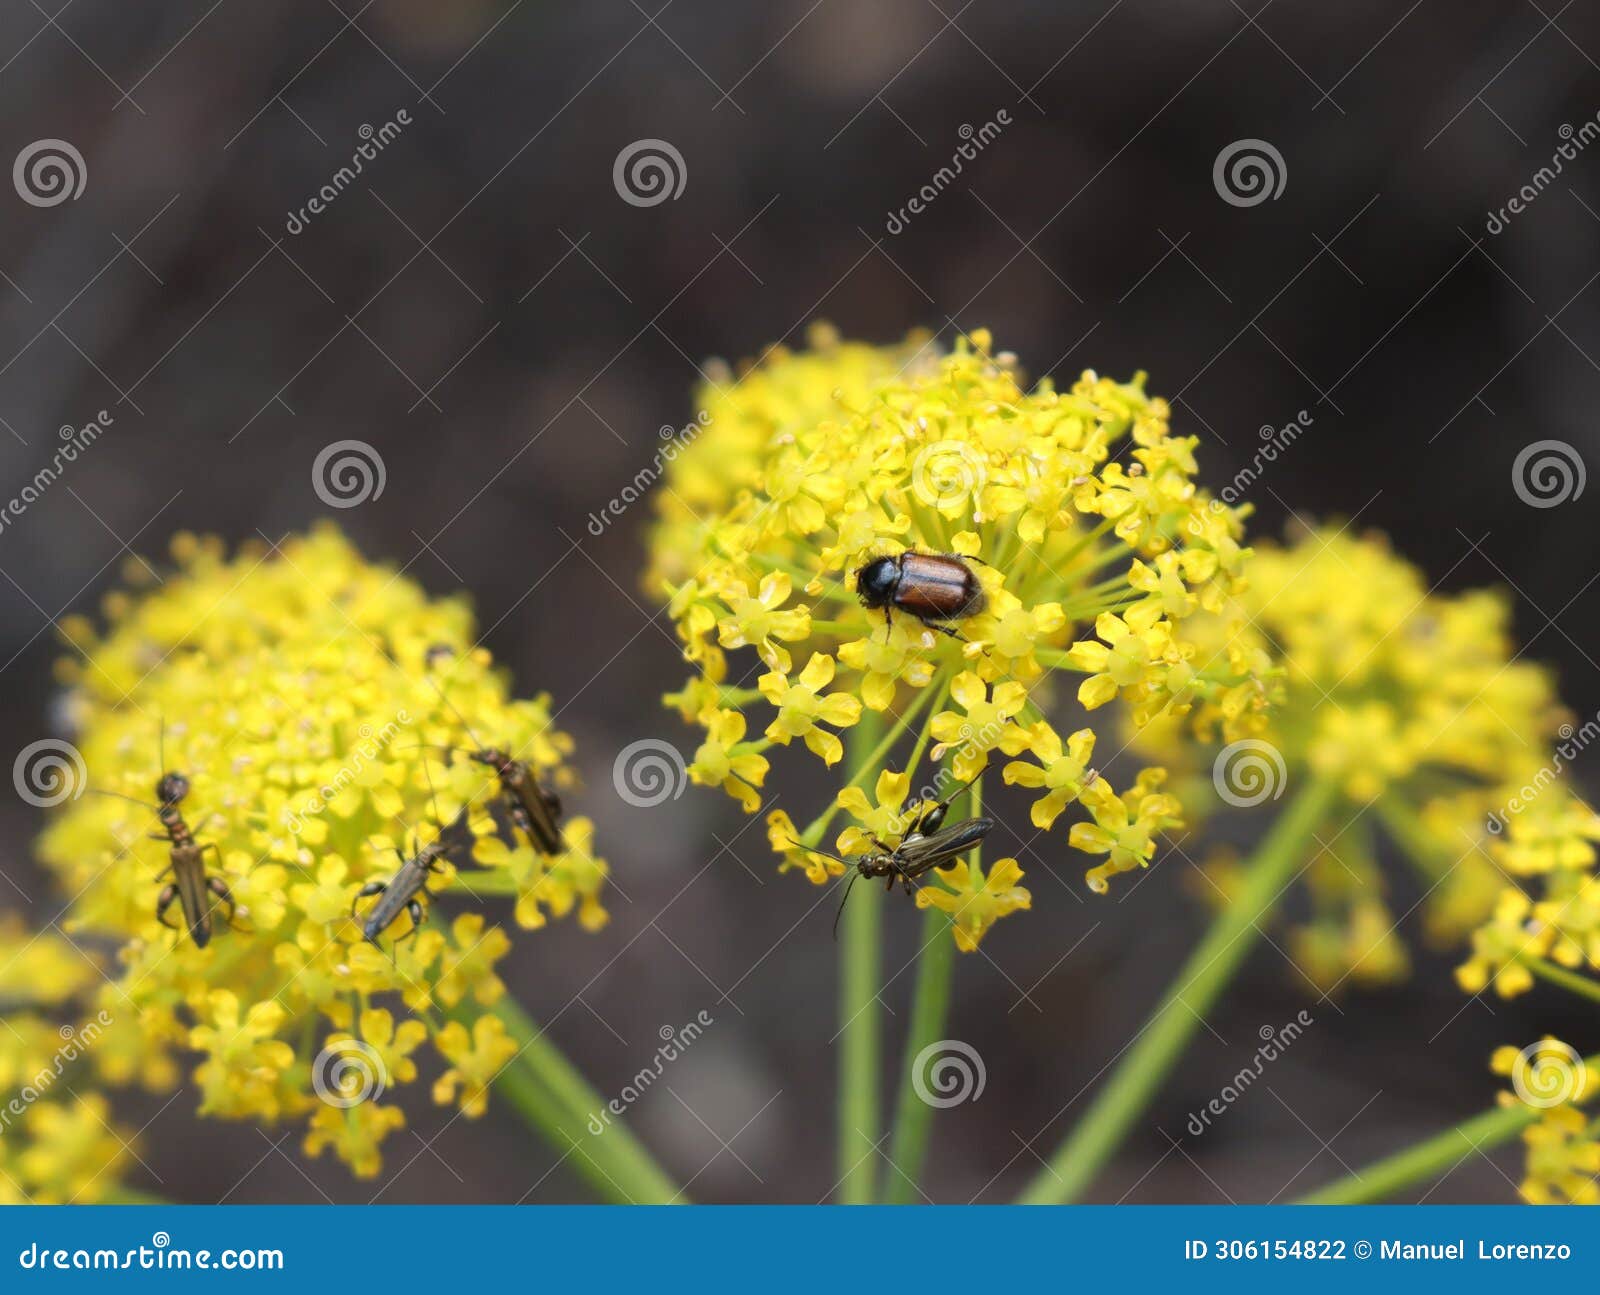 beautiful flowers of different colors with pollinating insects macro natural fence